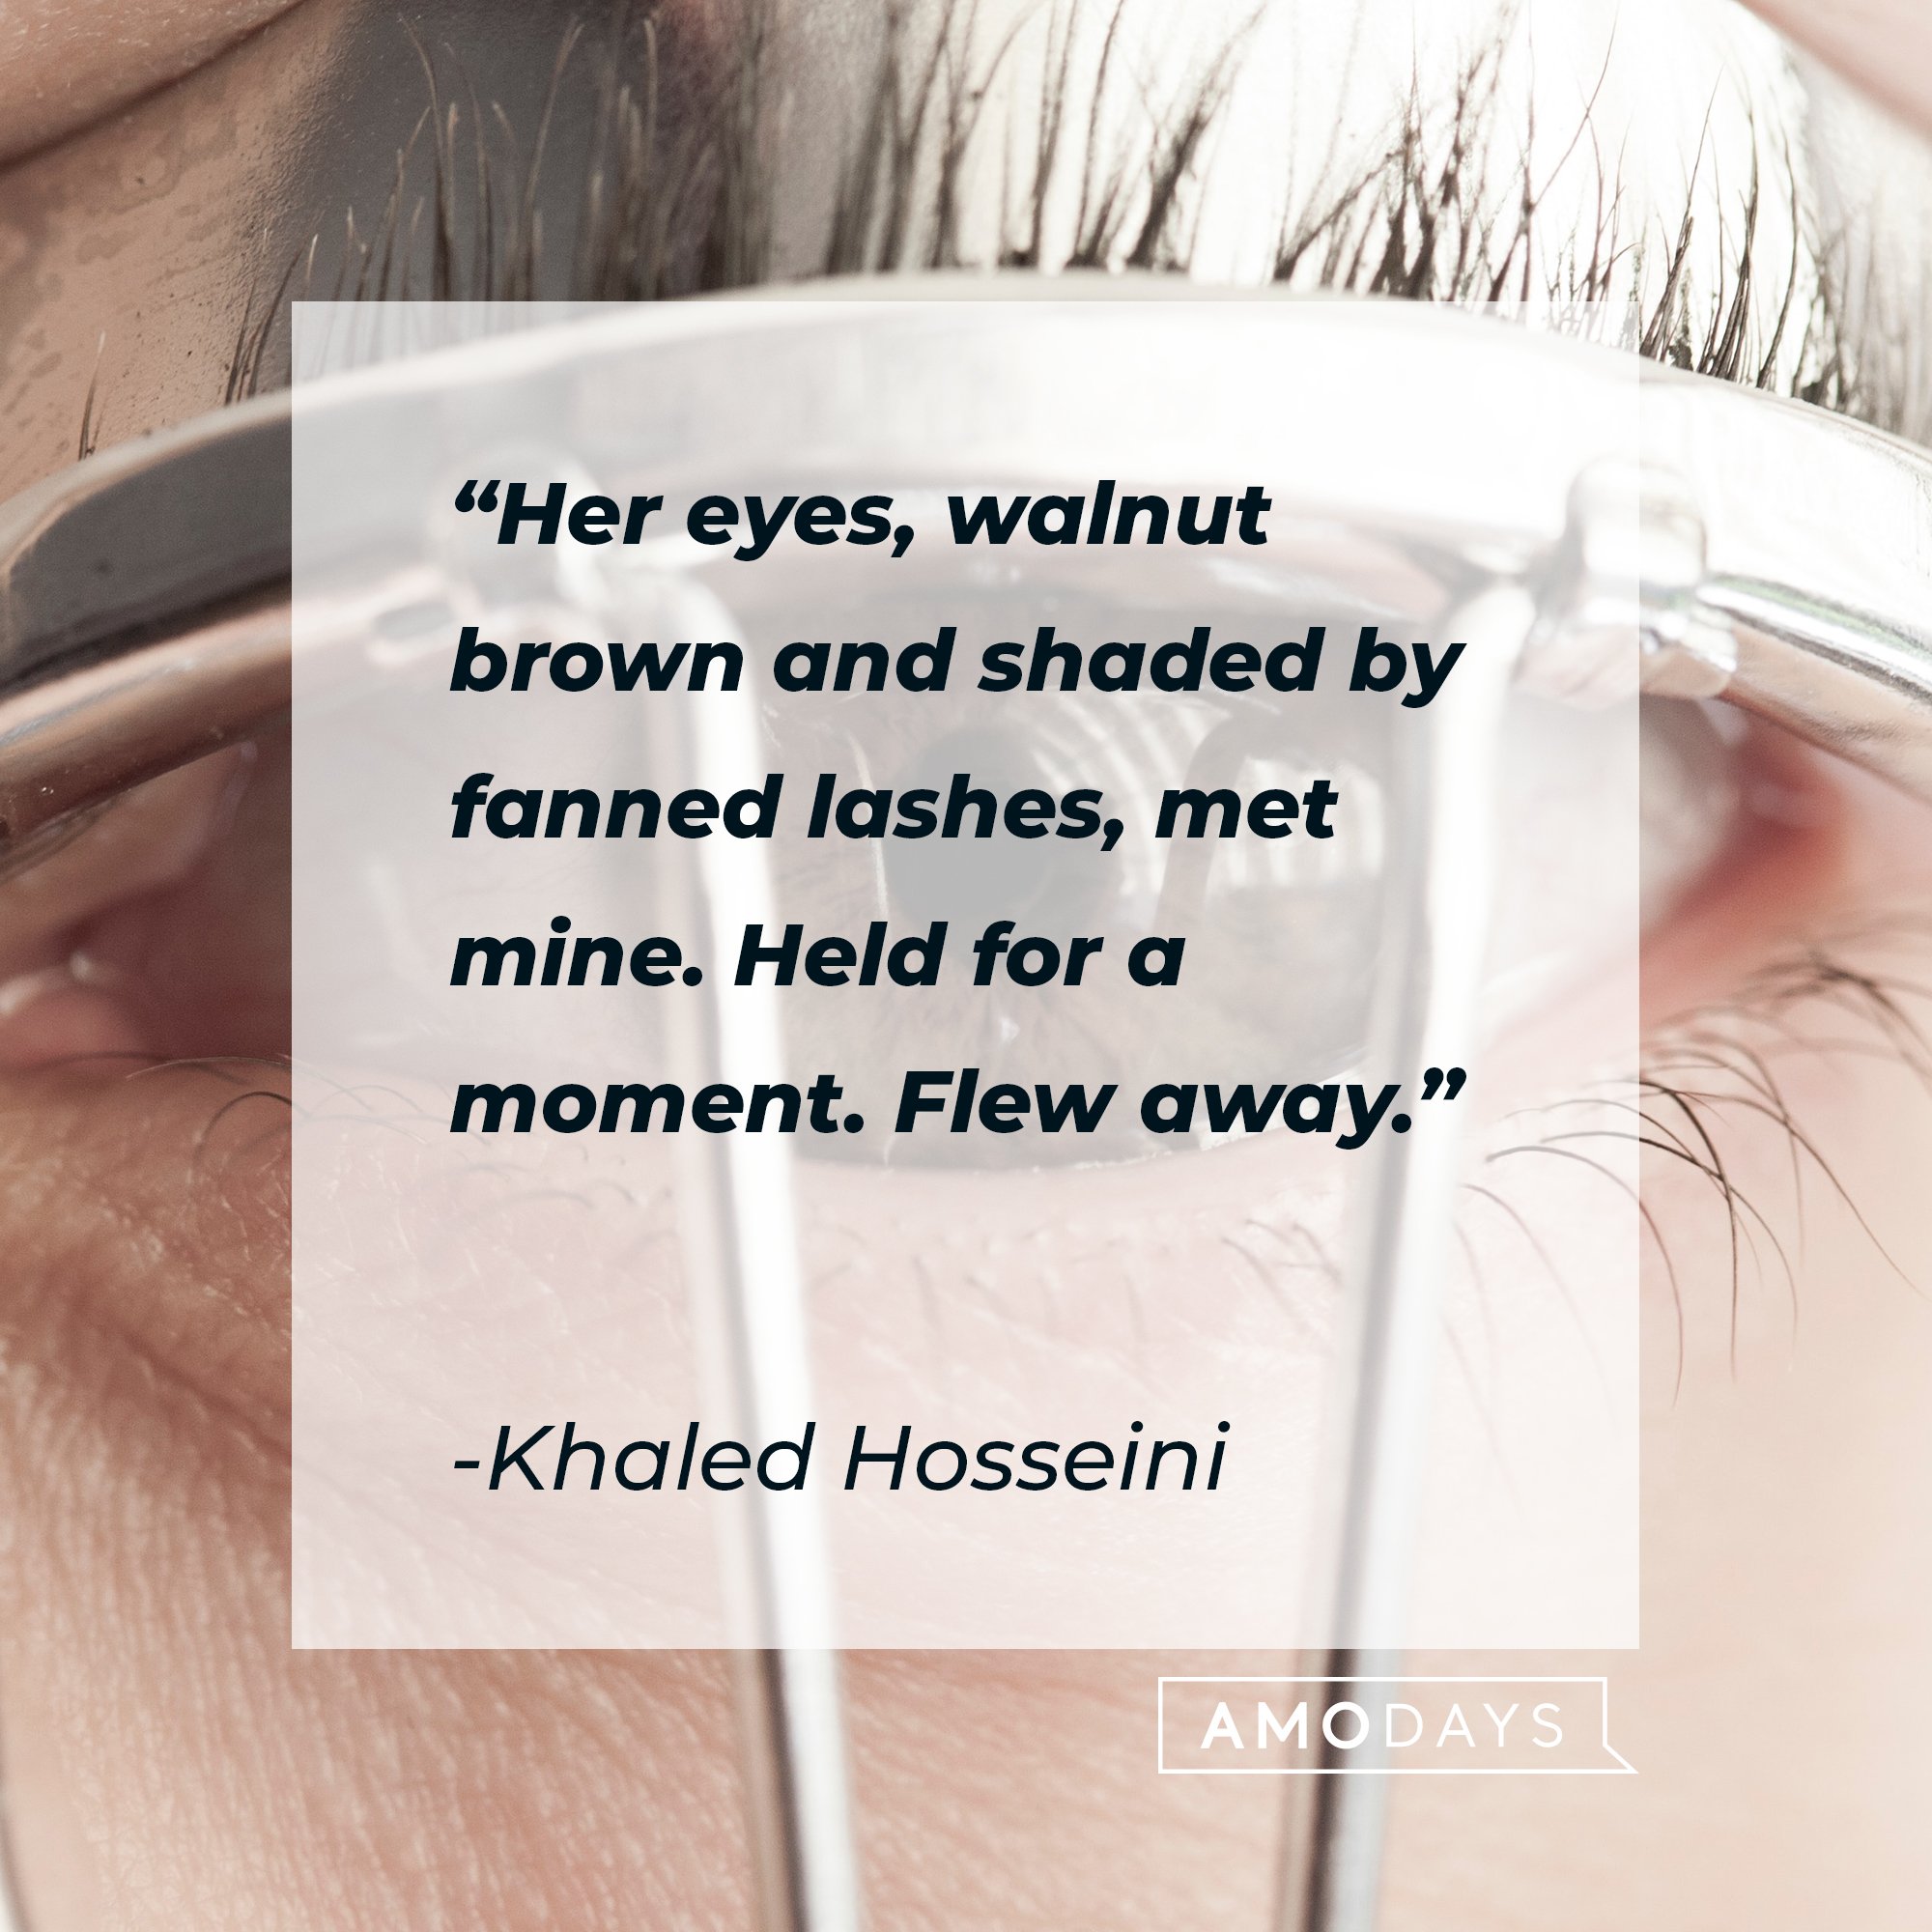  Khaled Hosseini’s quote: "Her eyes, walnut brown and shaded by fanned lashes, met mine. Held for a moment. Flew away." | Image: AmoDays